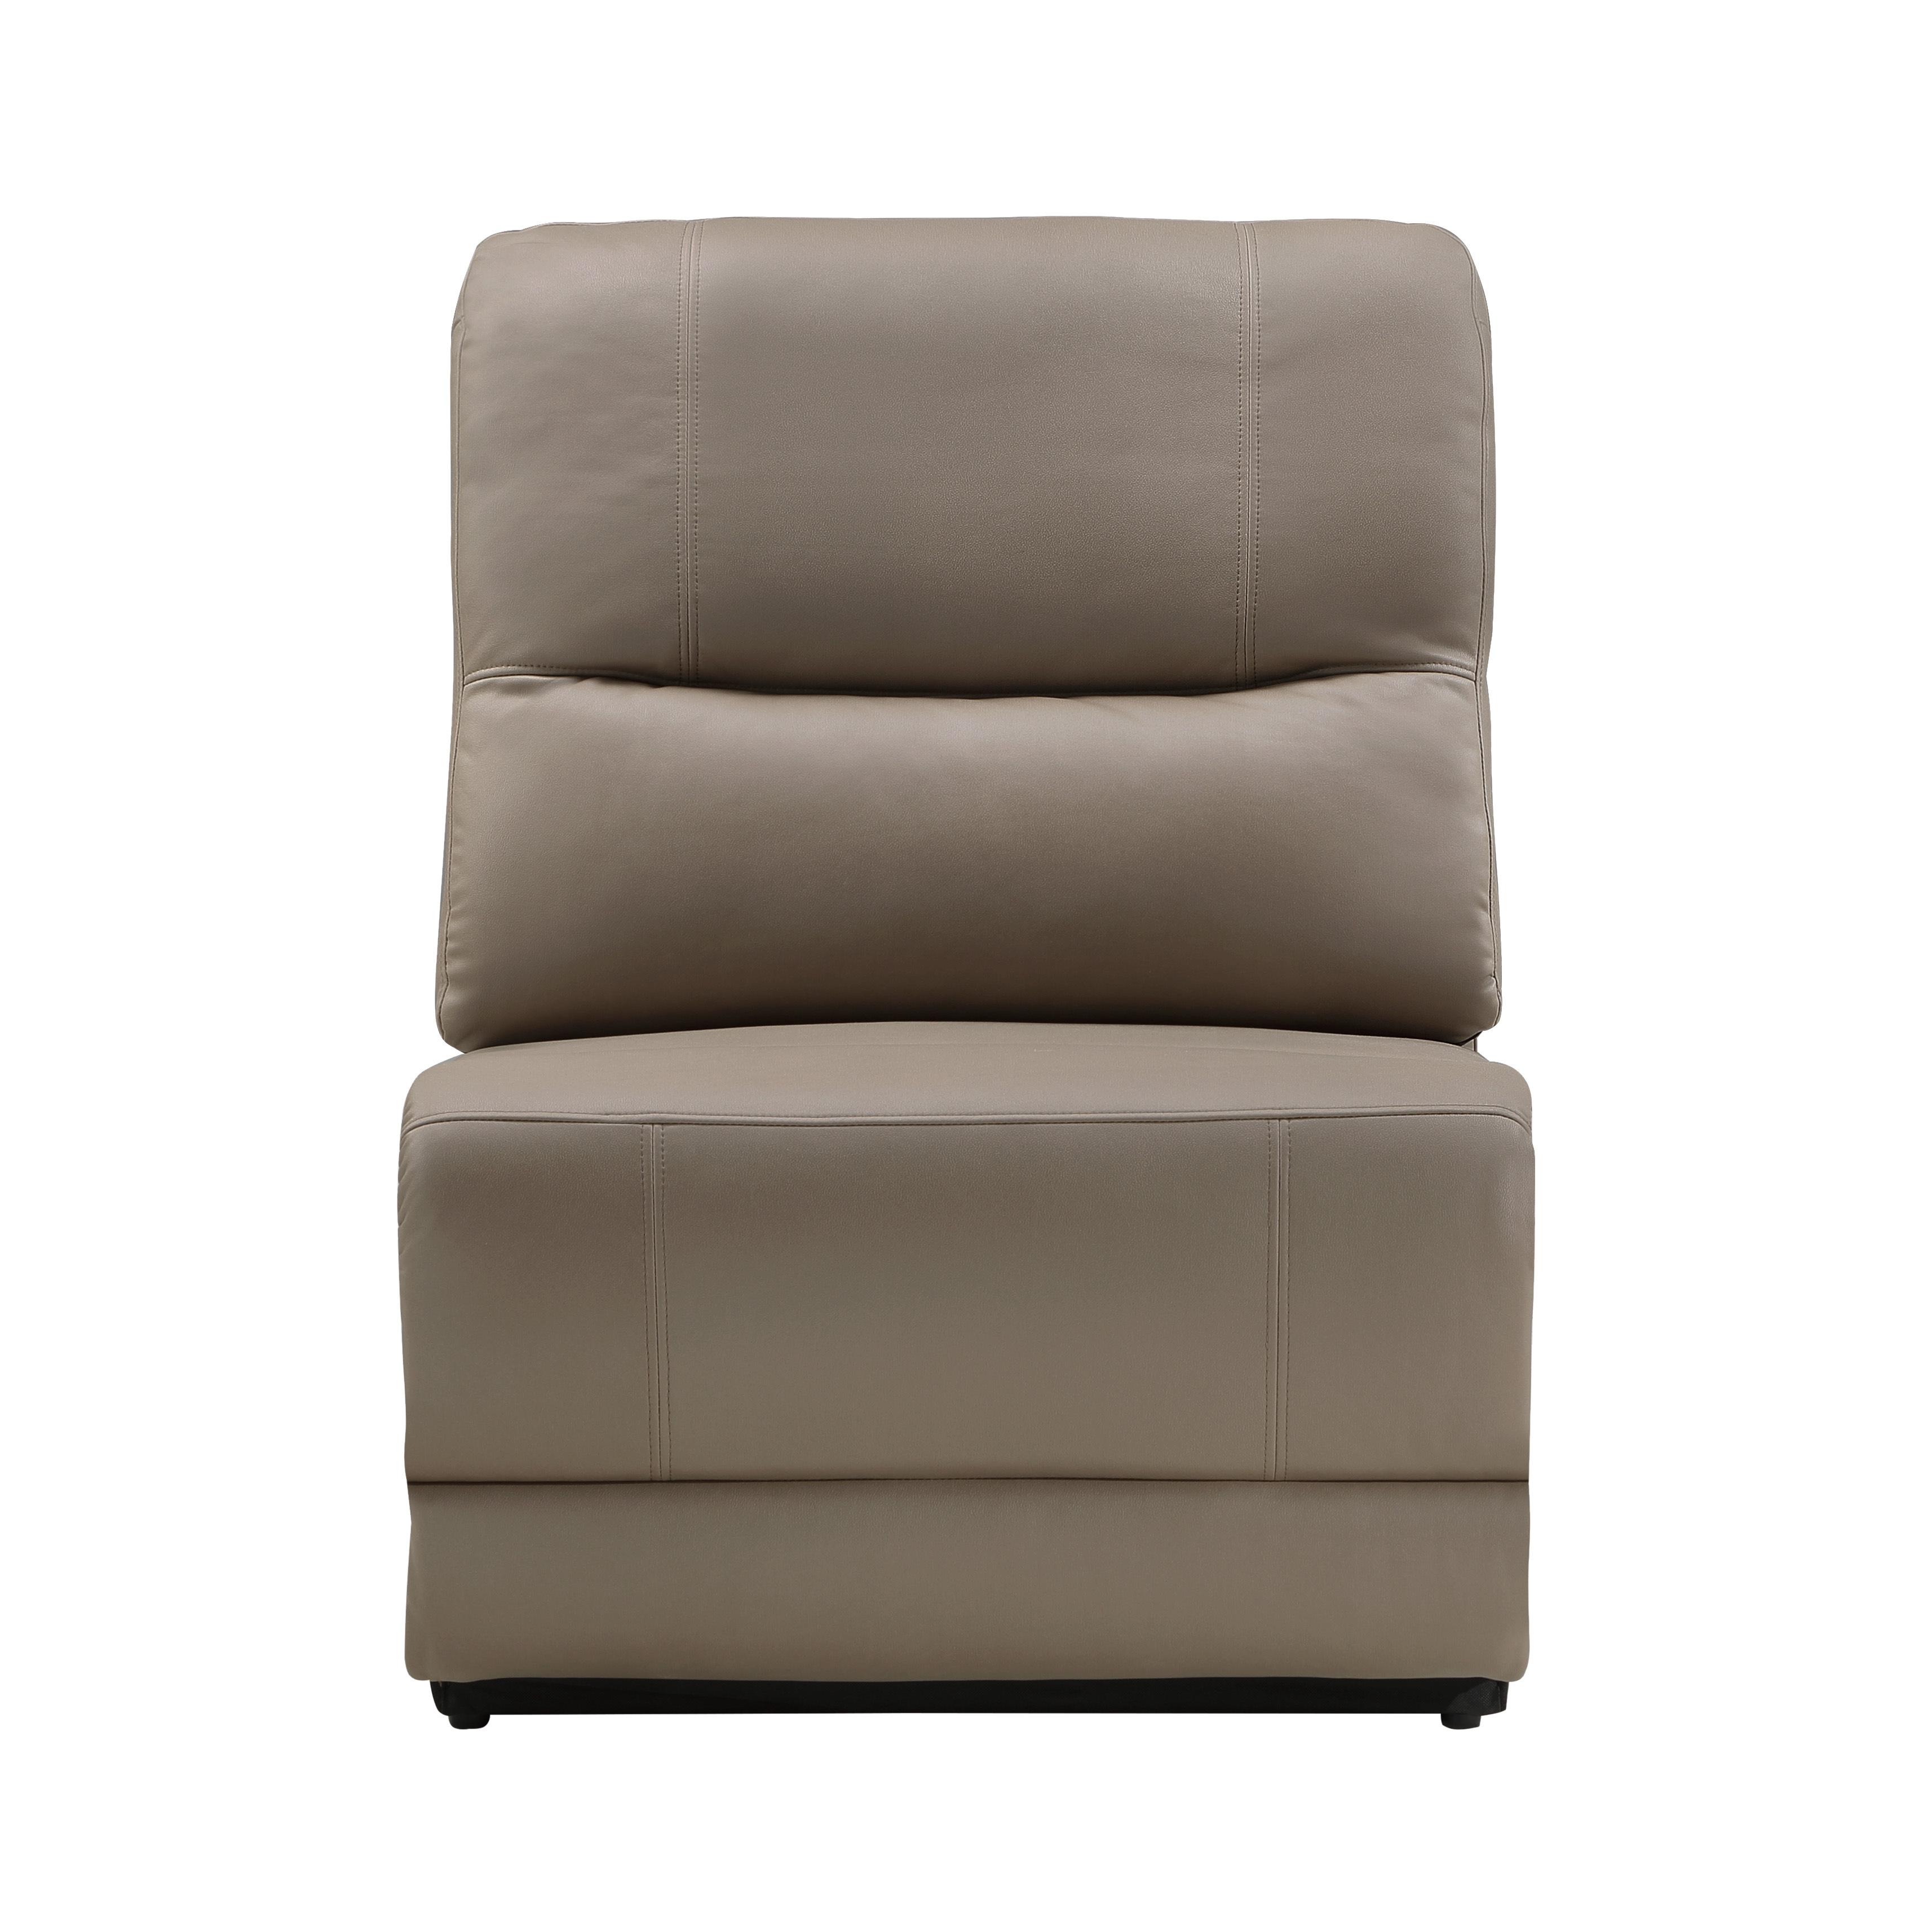 Modern Power Armless Reclining Chair 9429TP-ARPWH LeGrande 9429TP-ARPWH in Taupe Microfiber